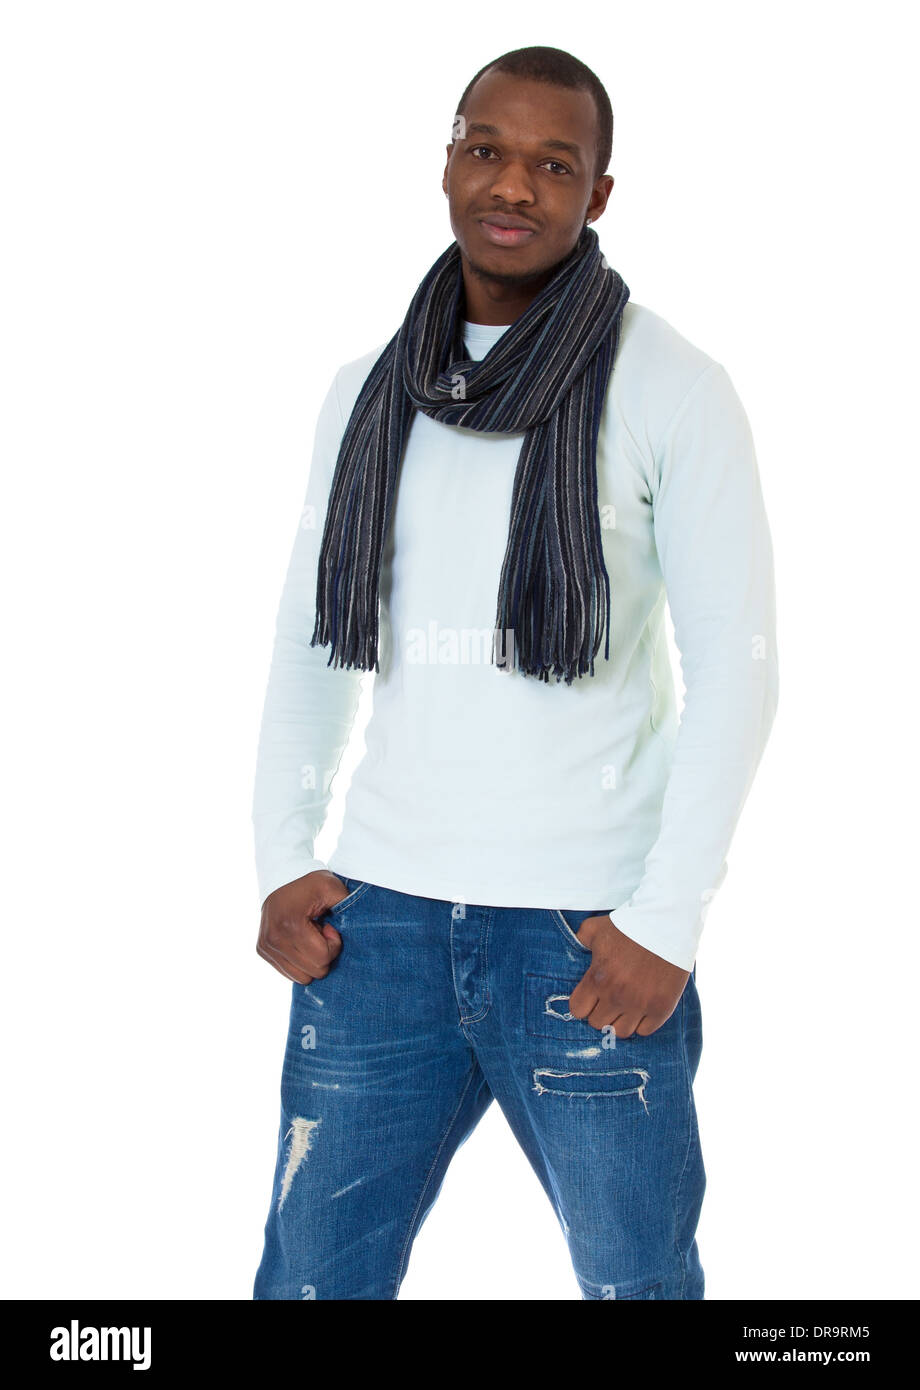 Attractive black guy. All on white background. Stock Photo